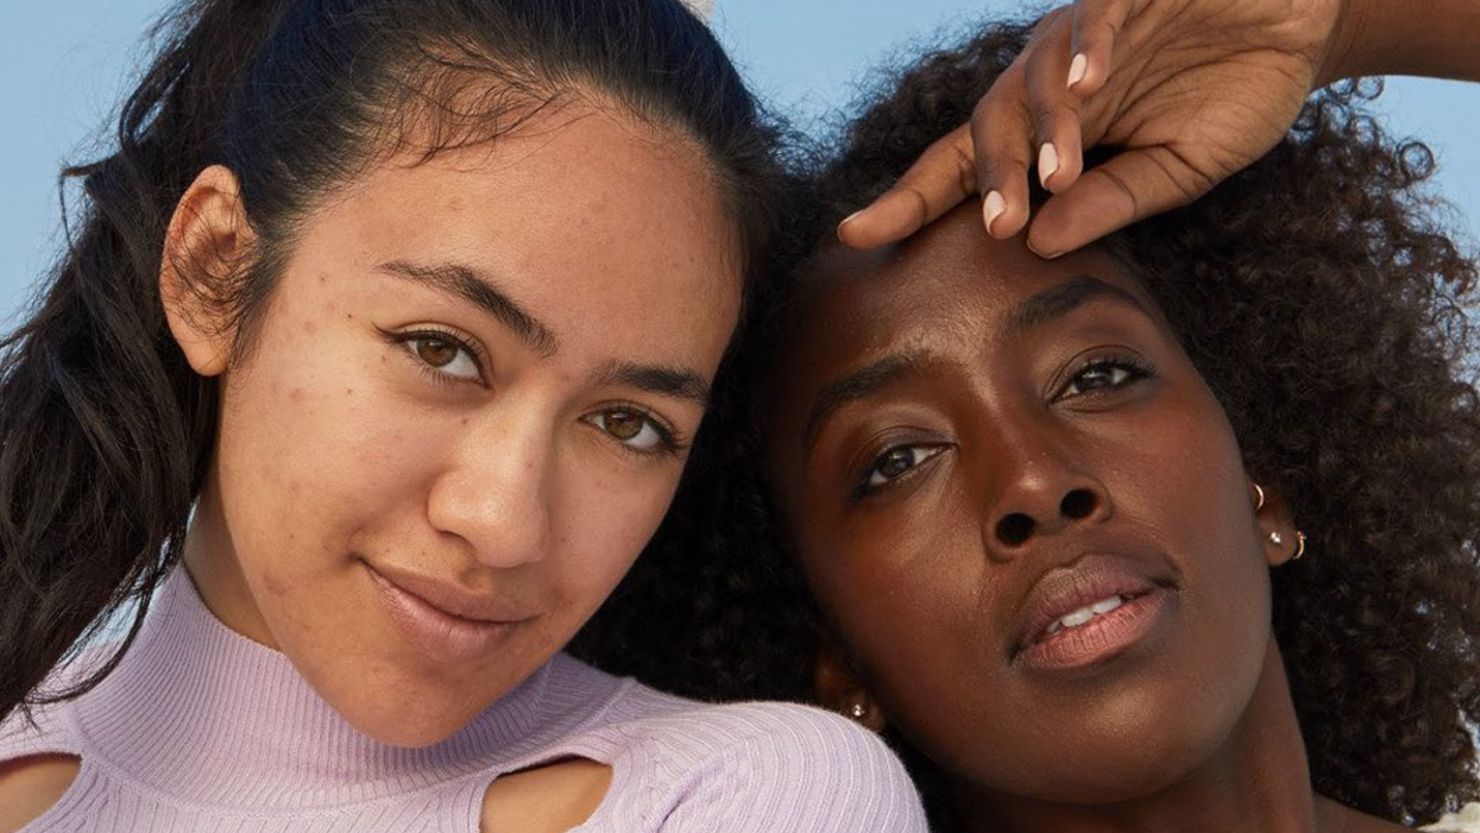 7 Ways to Even-Out Your Skin Tone, According to Dermatologists